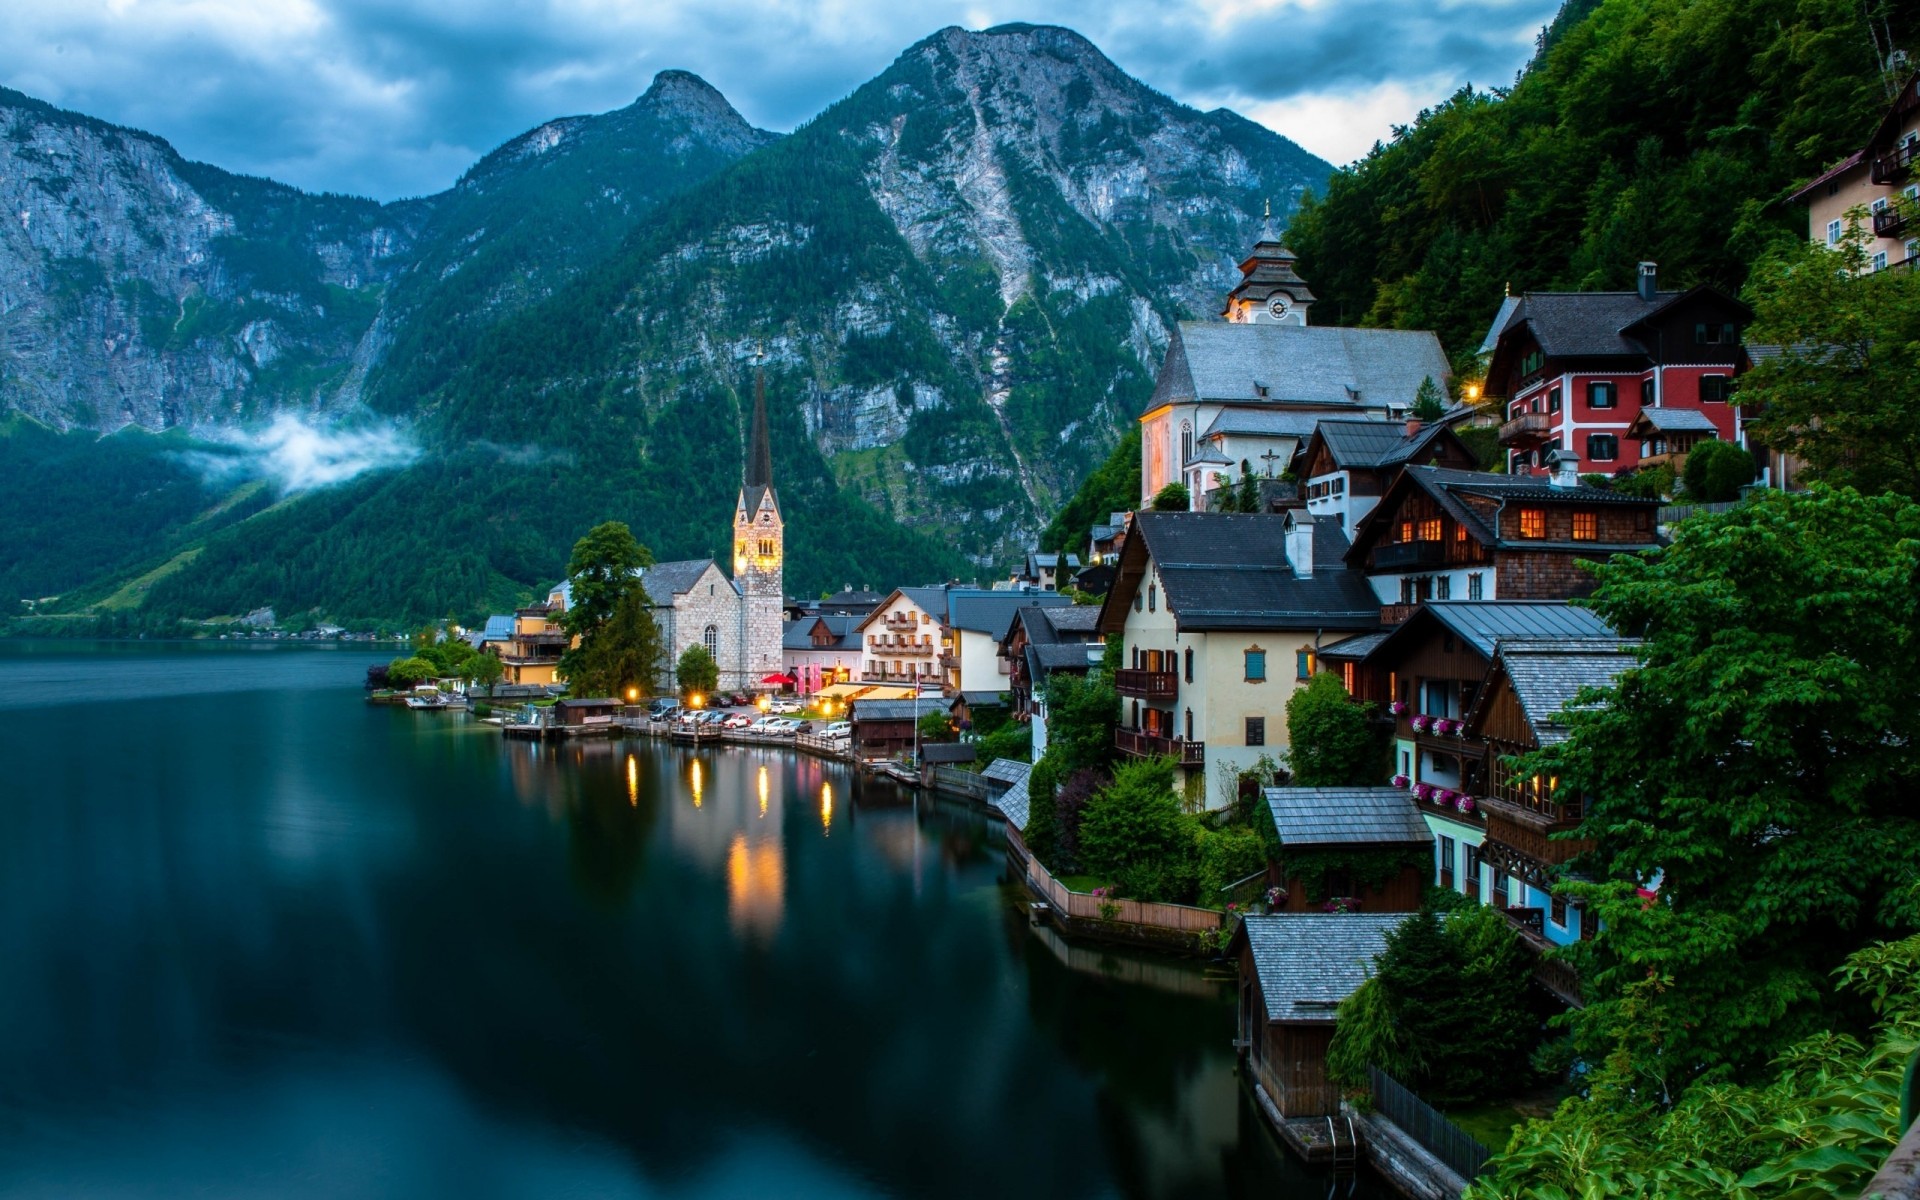 other city travel water lake outdoors architecture house mountain landscape nature town fjord river tree sky reflection hallstatt austria mountains